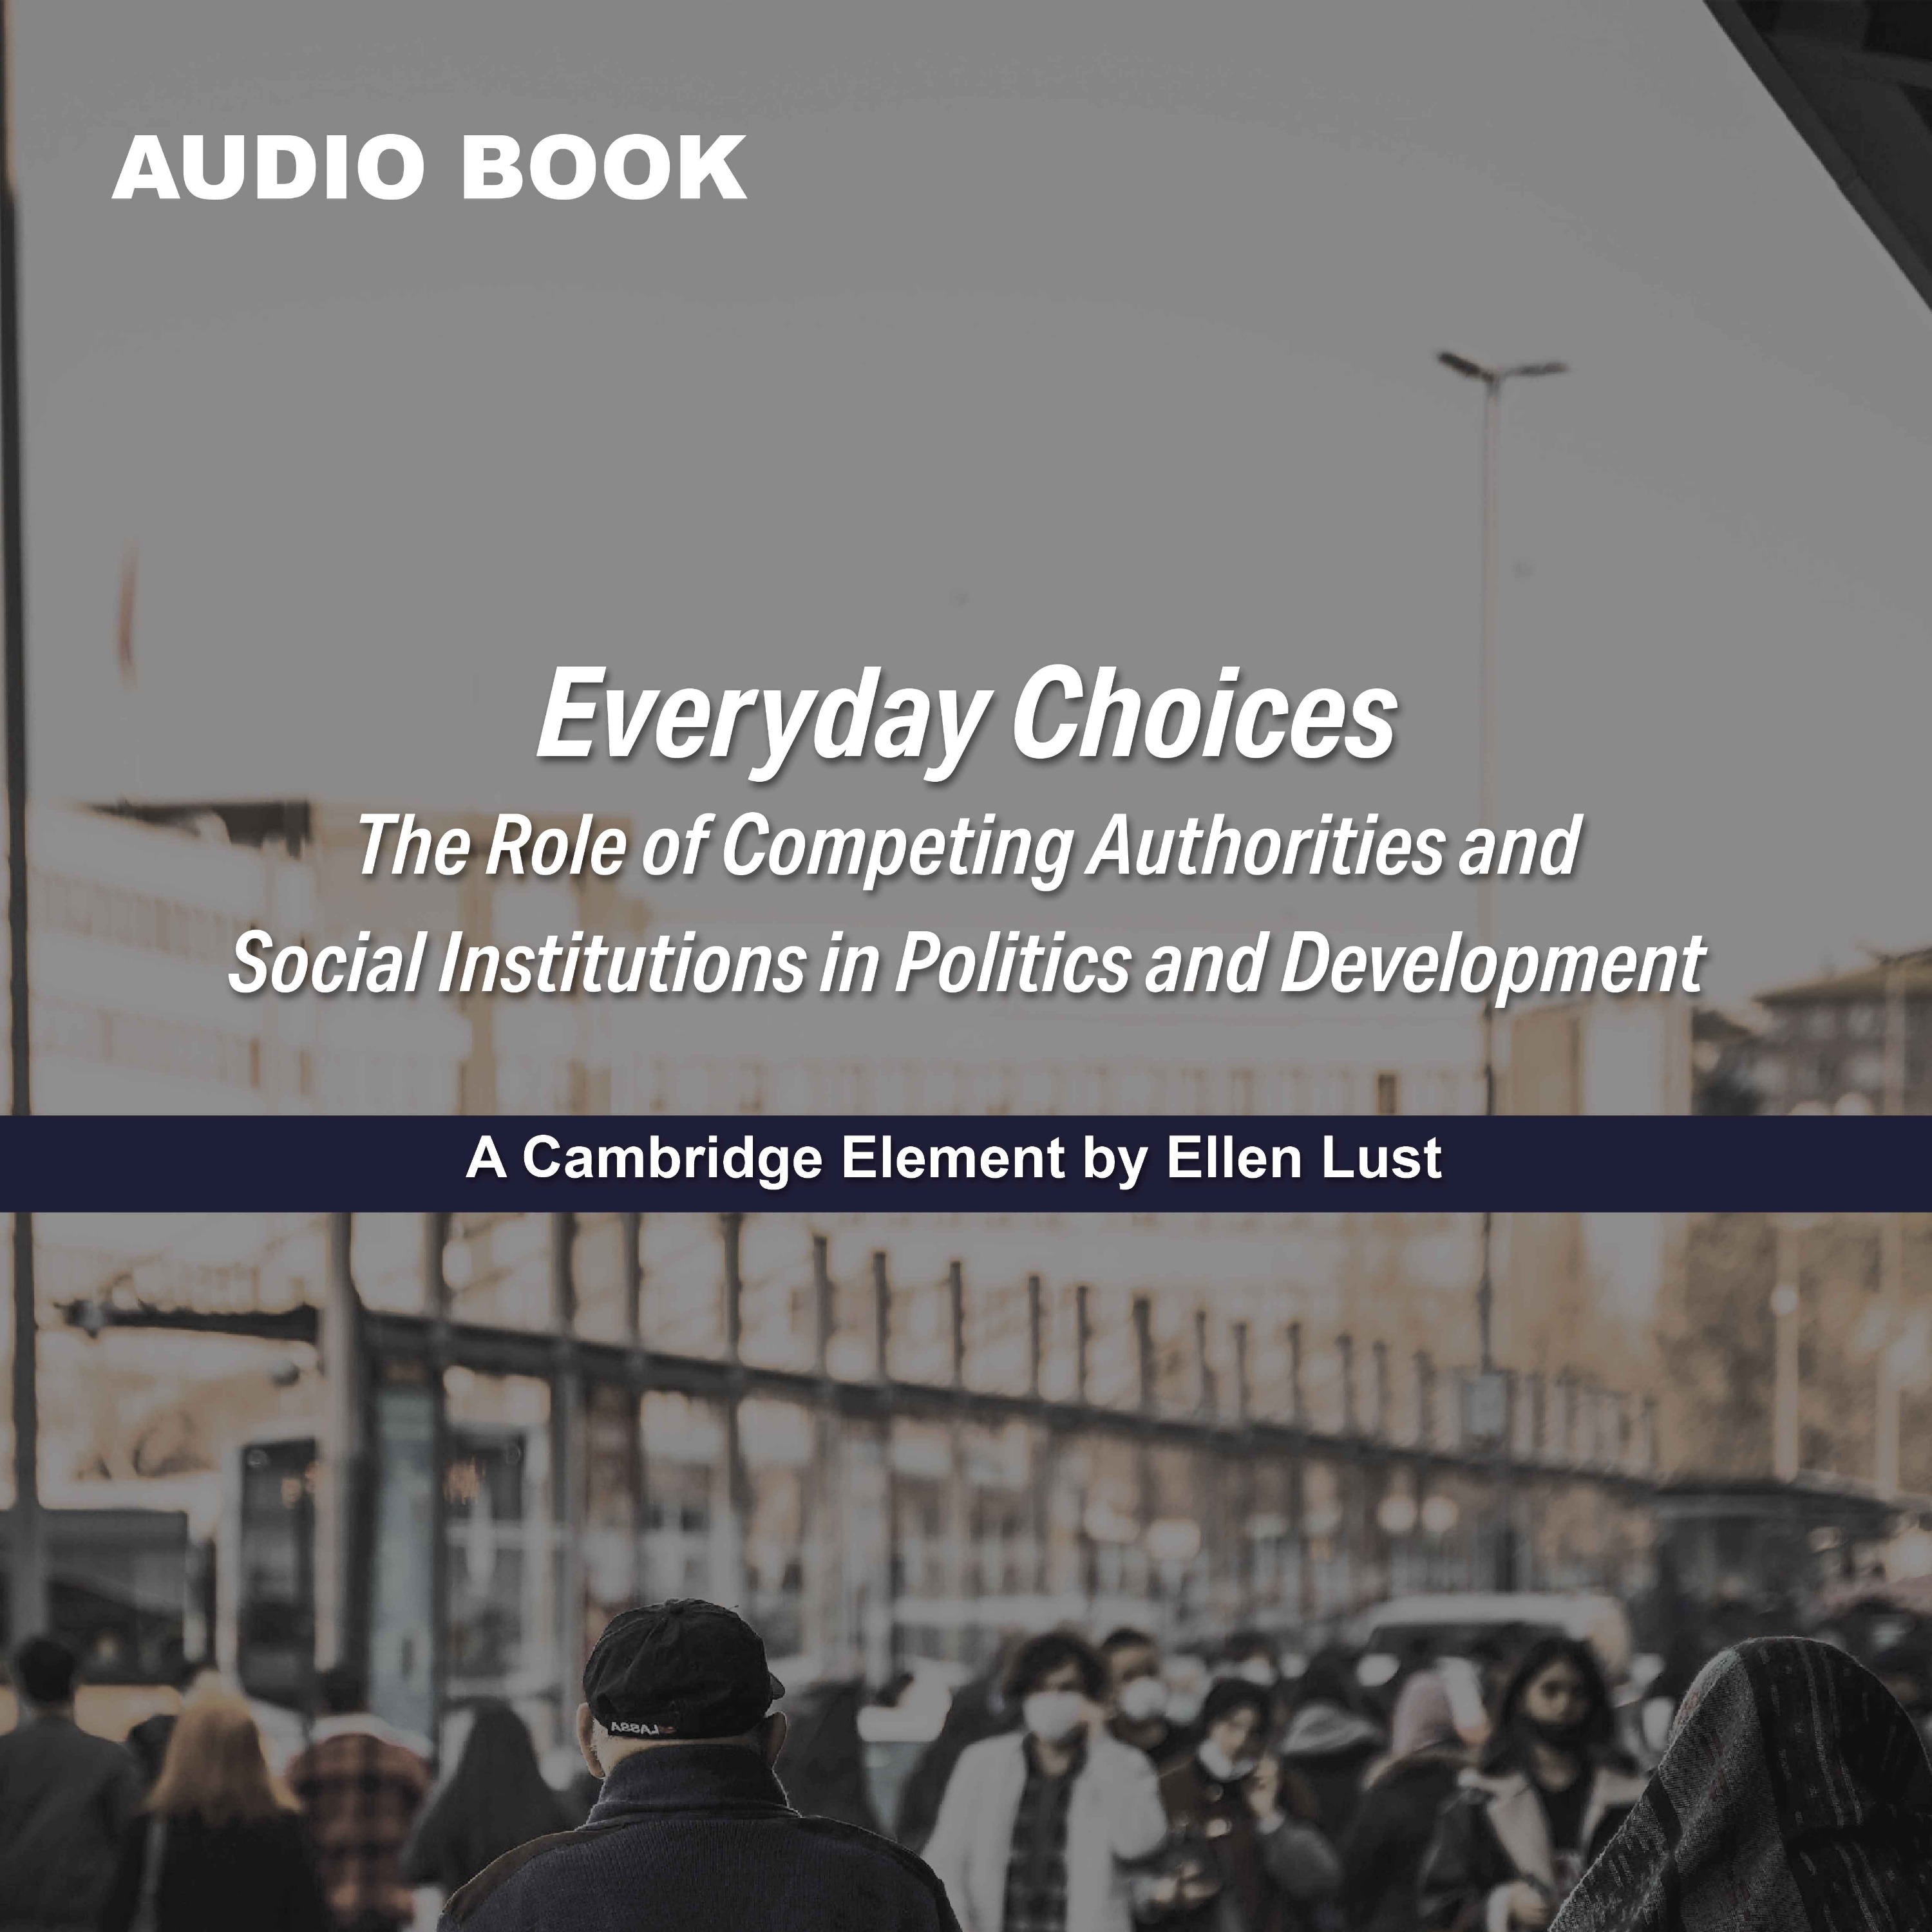 Everyday Choices by Ellen Lust